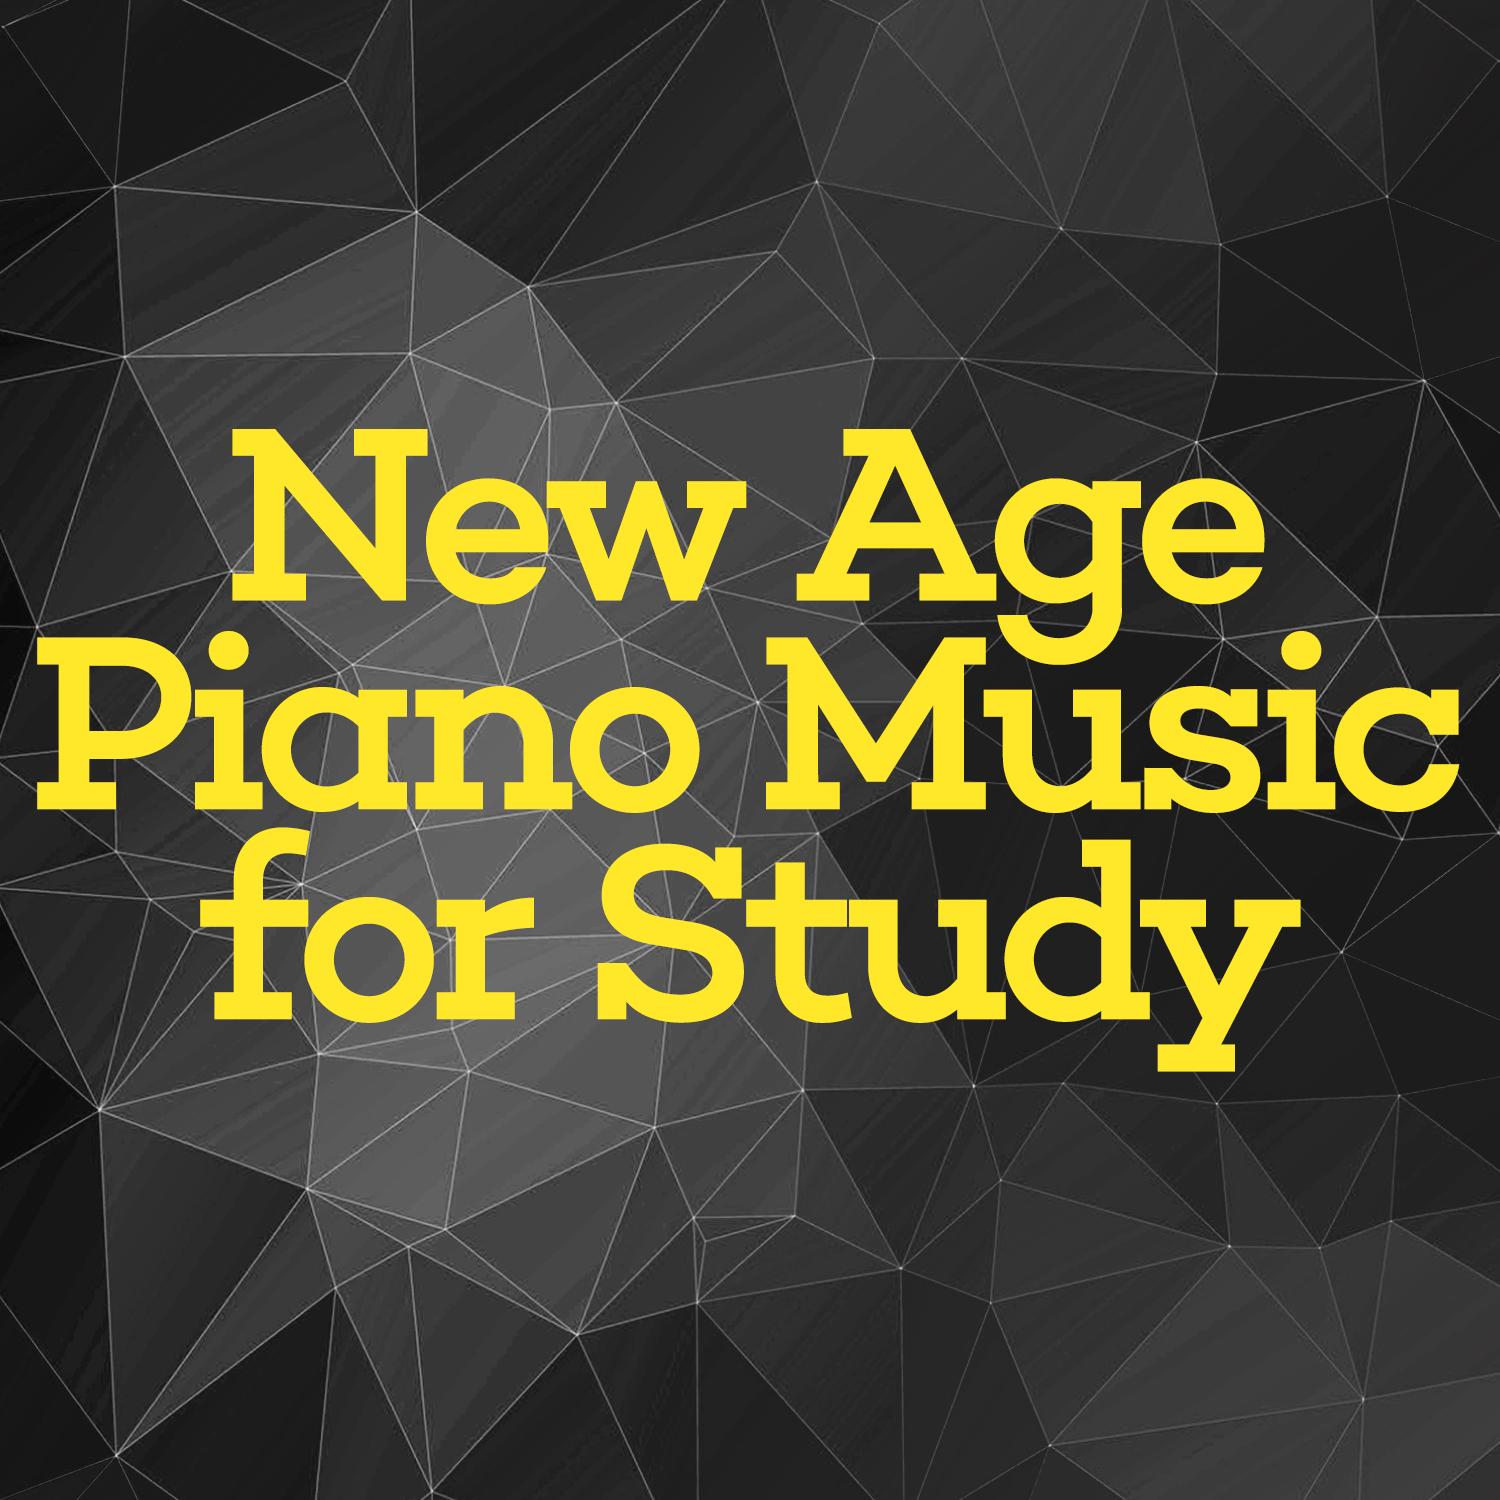 New Age Piano Music for Study